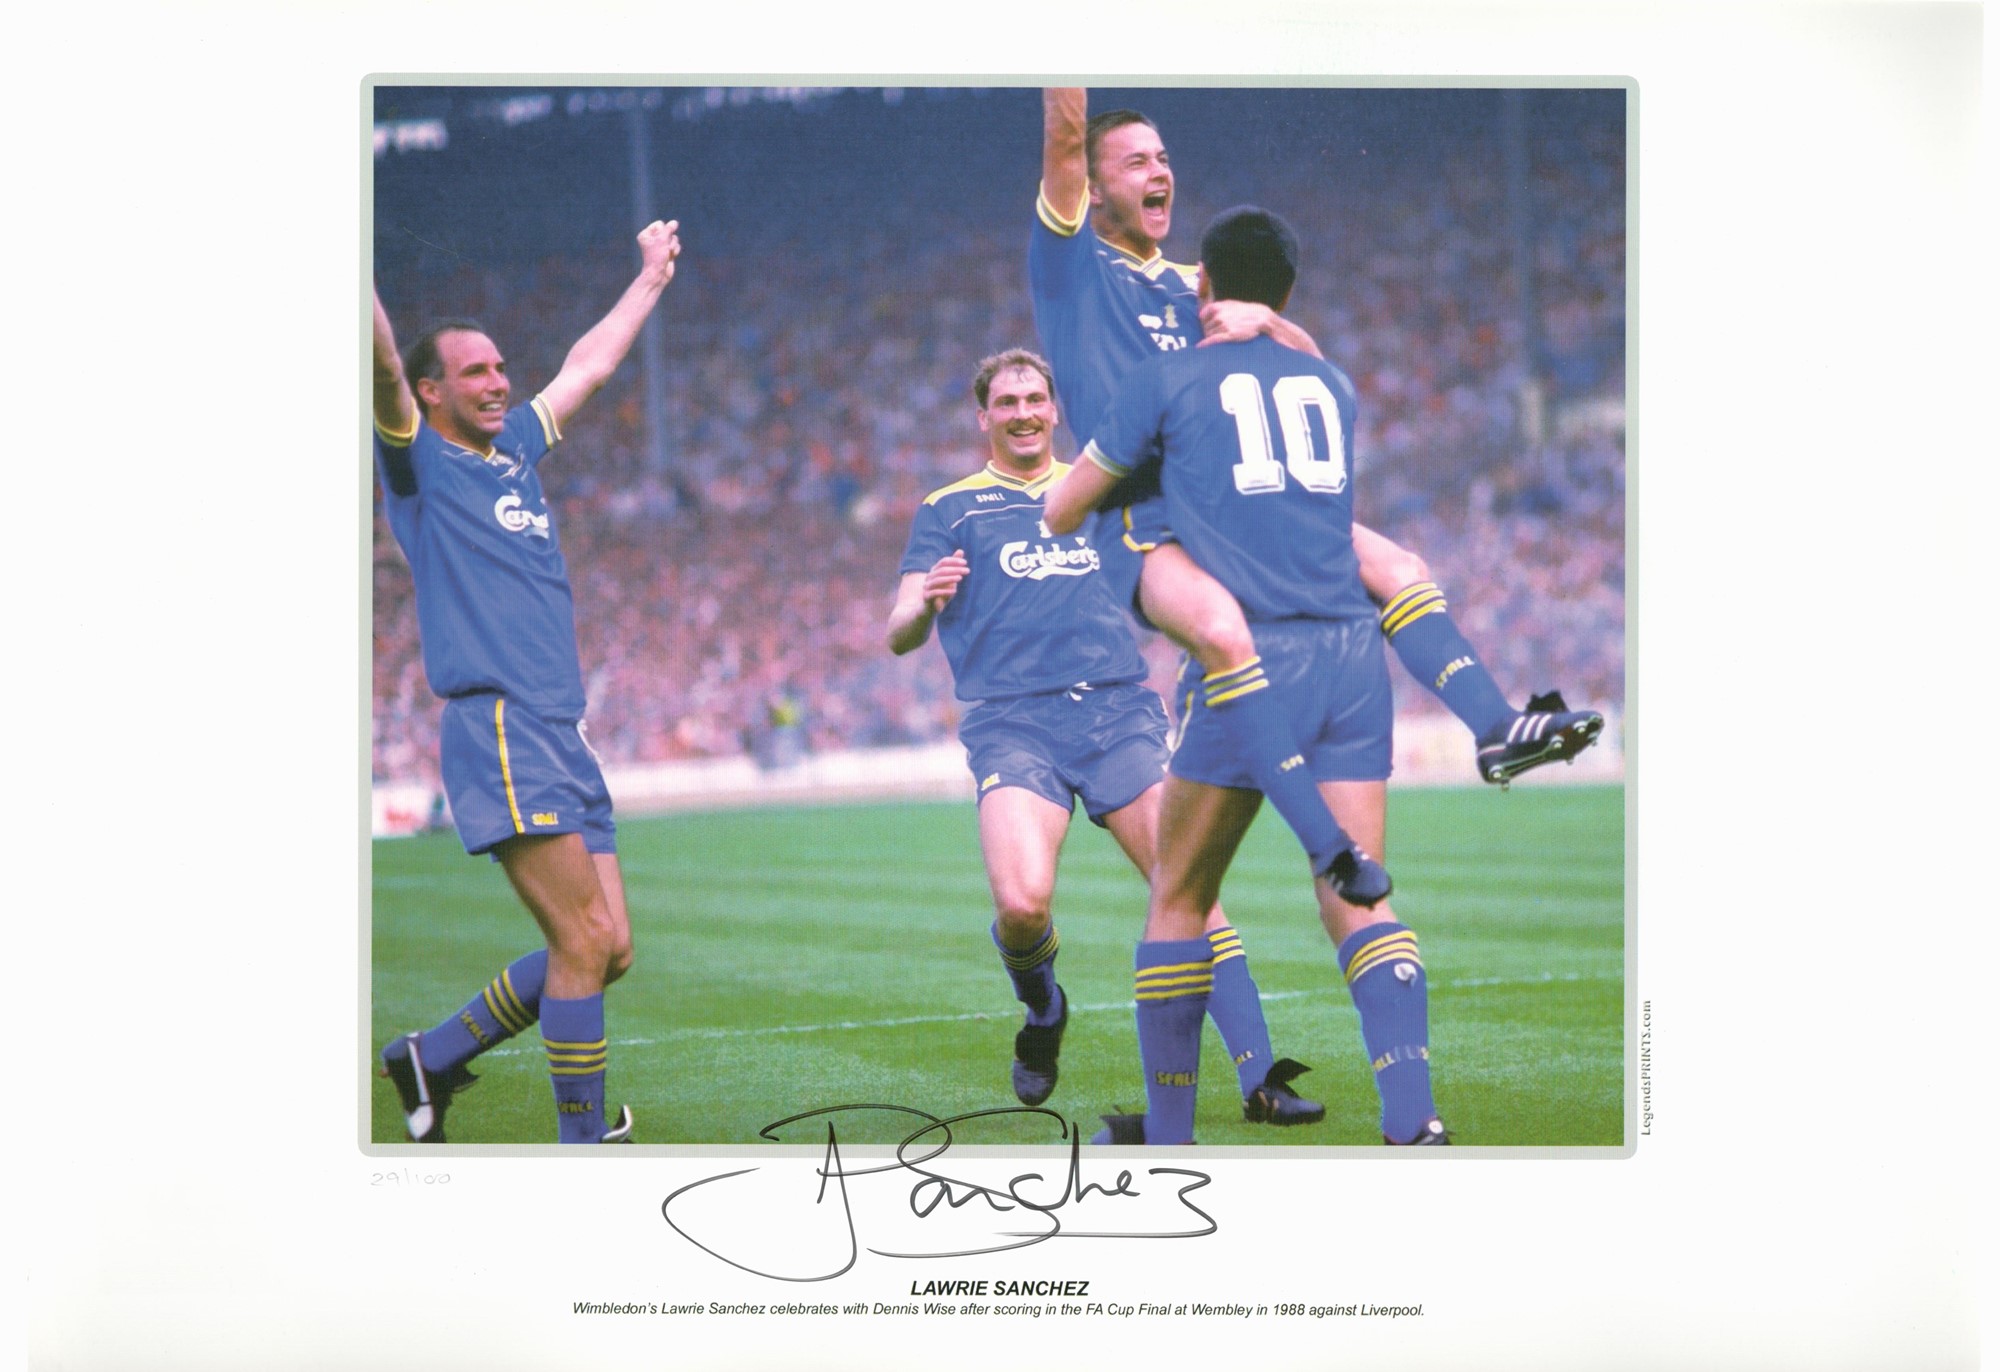 Football Lawrie Sanchez signed 16x12 colour print pictured celebrating after scoring for Wimbledon - Image 2 of 2